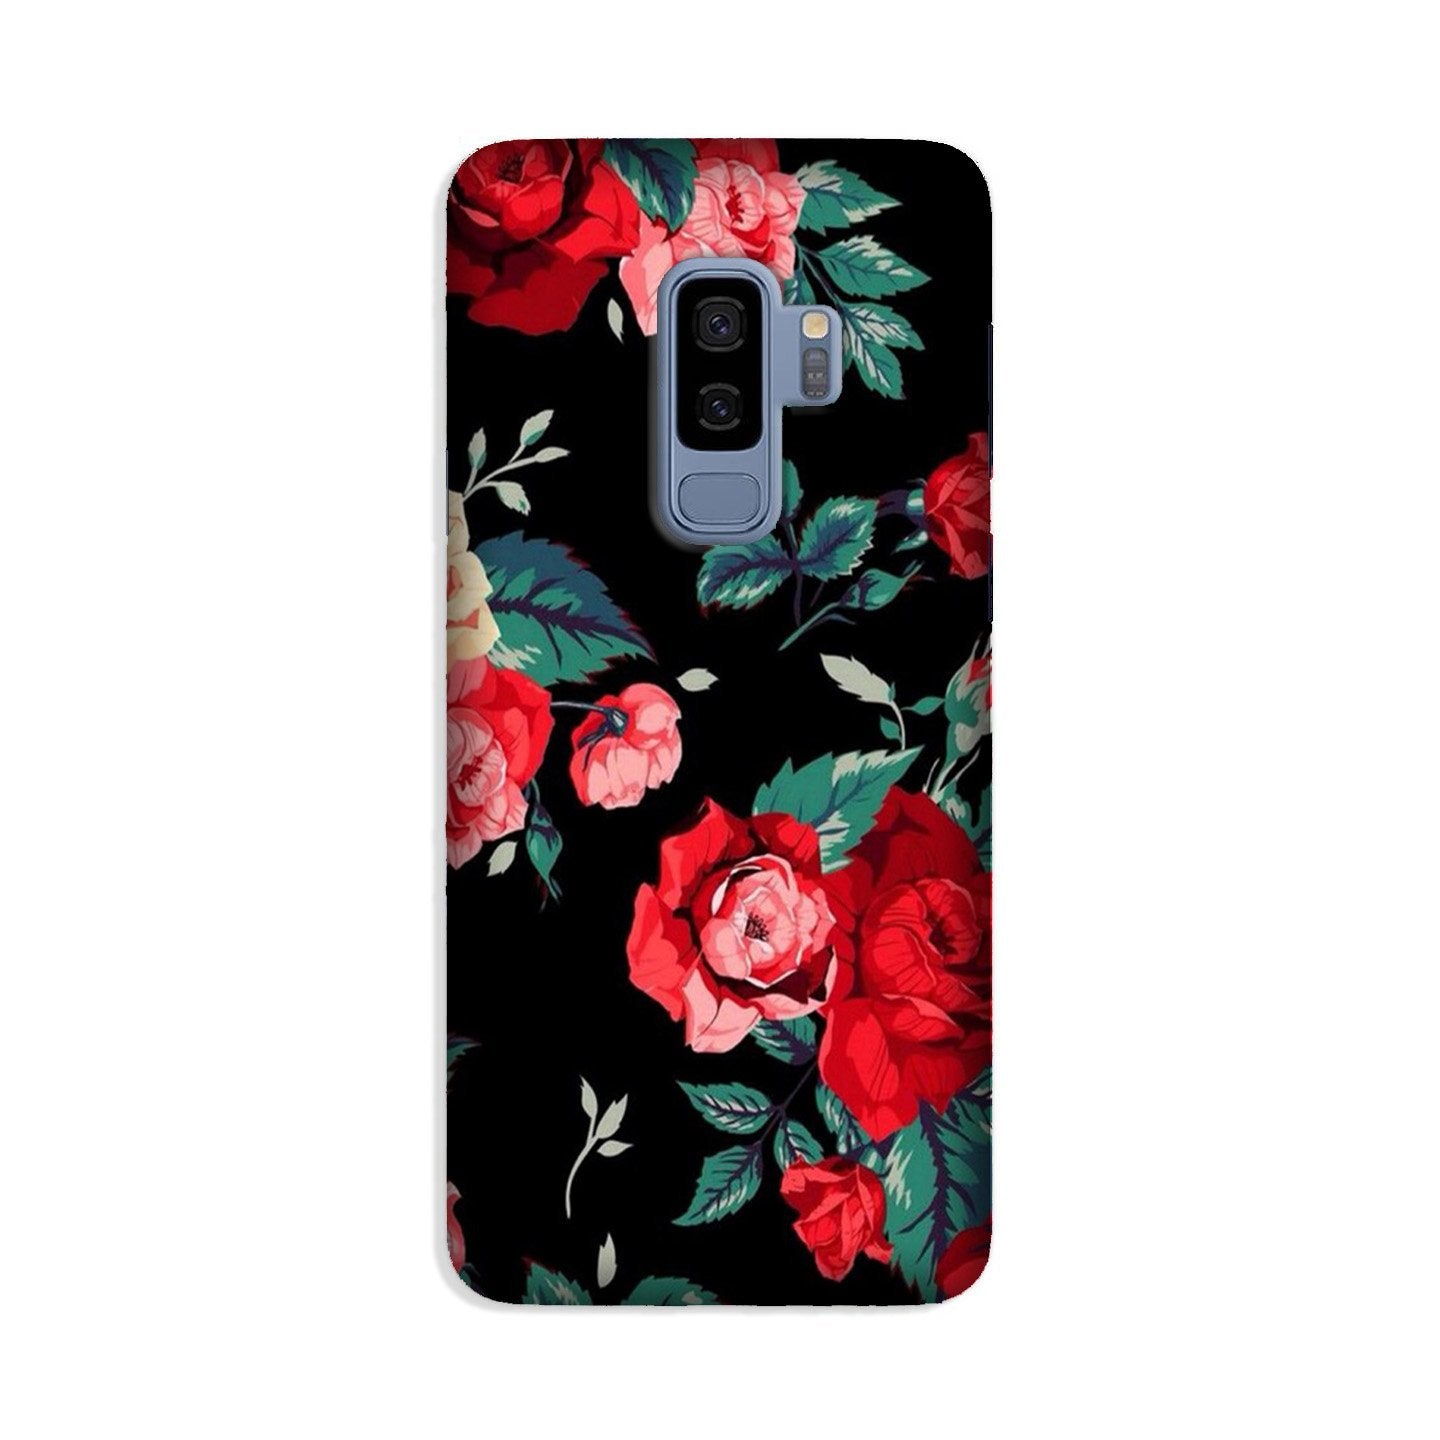 Red Rose2 Case for Galaxy S9 Plus